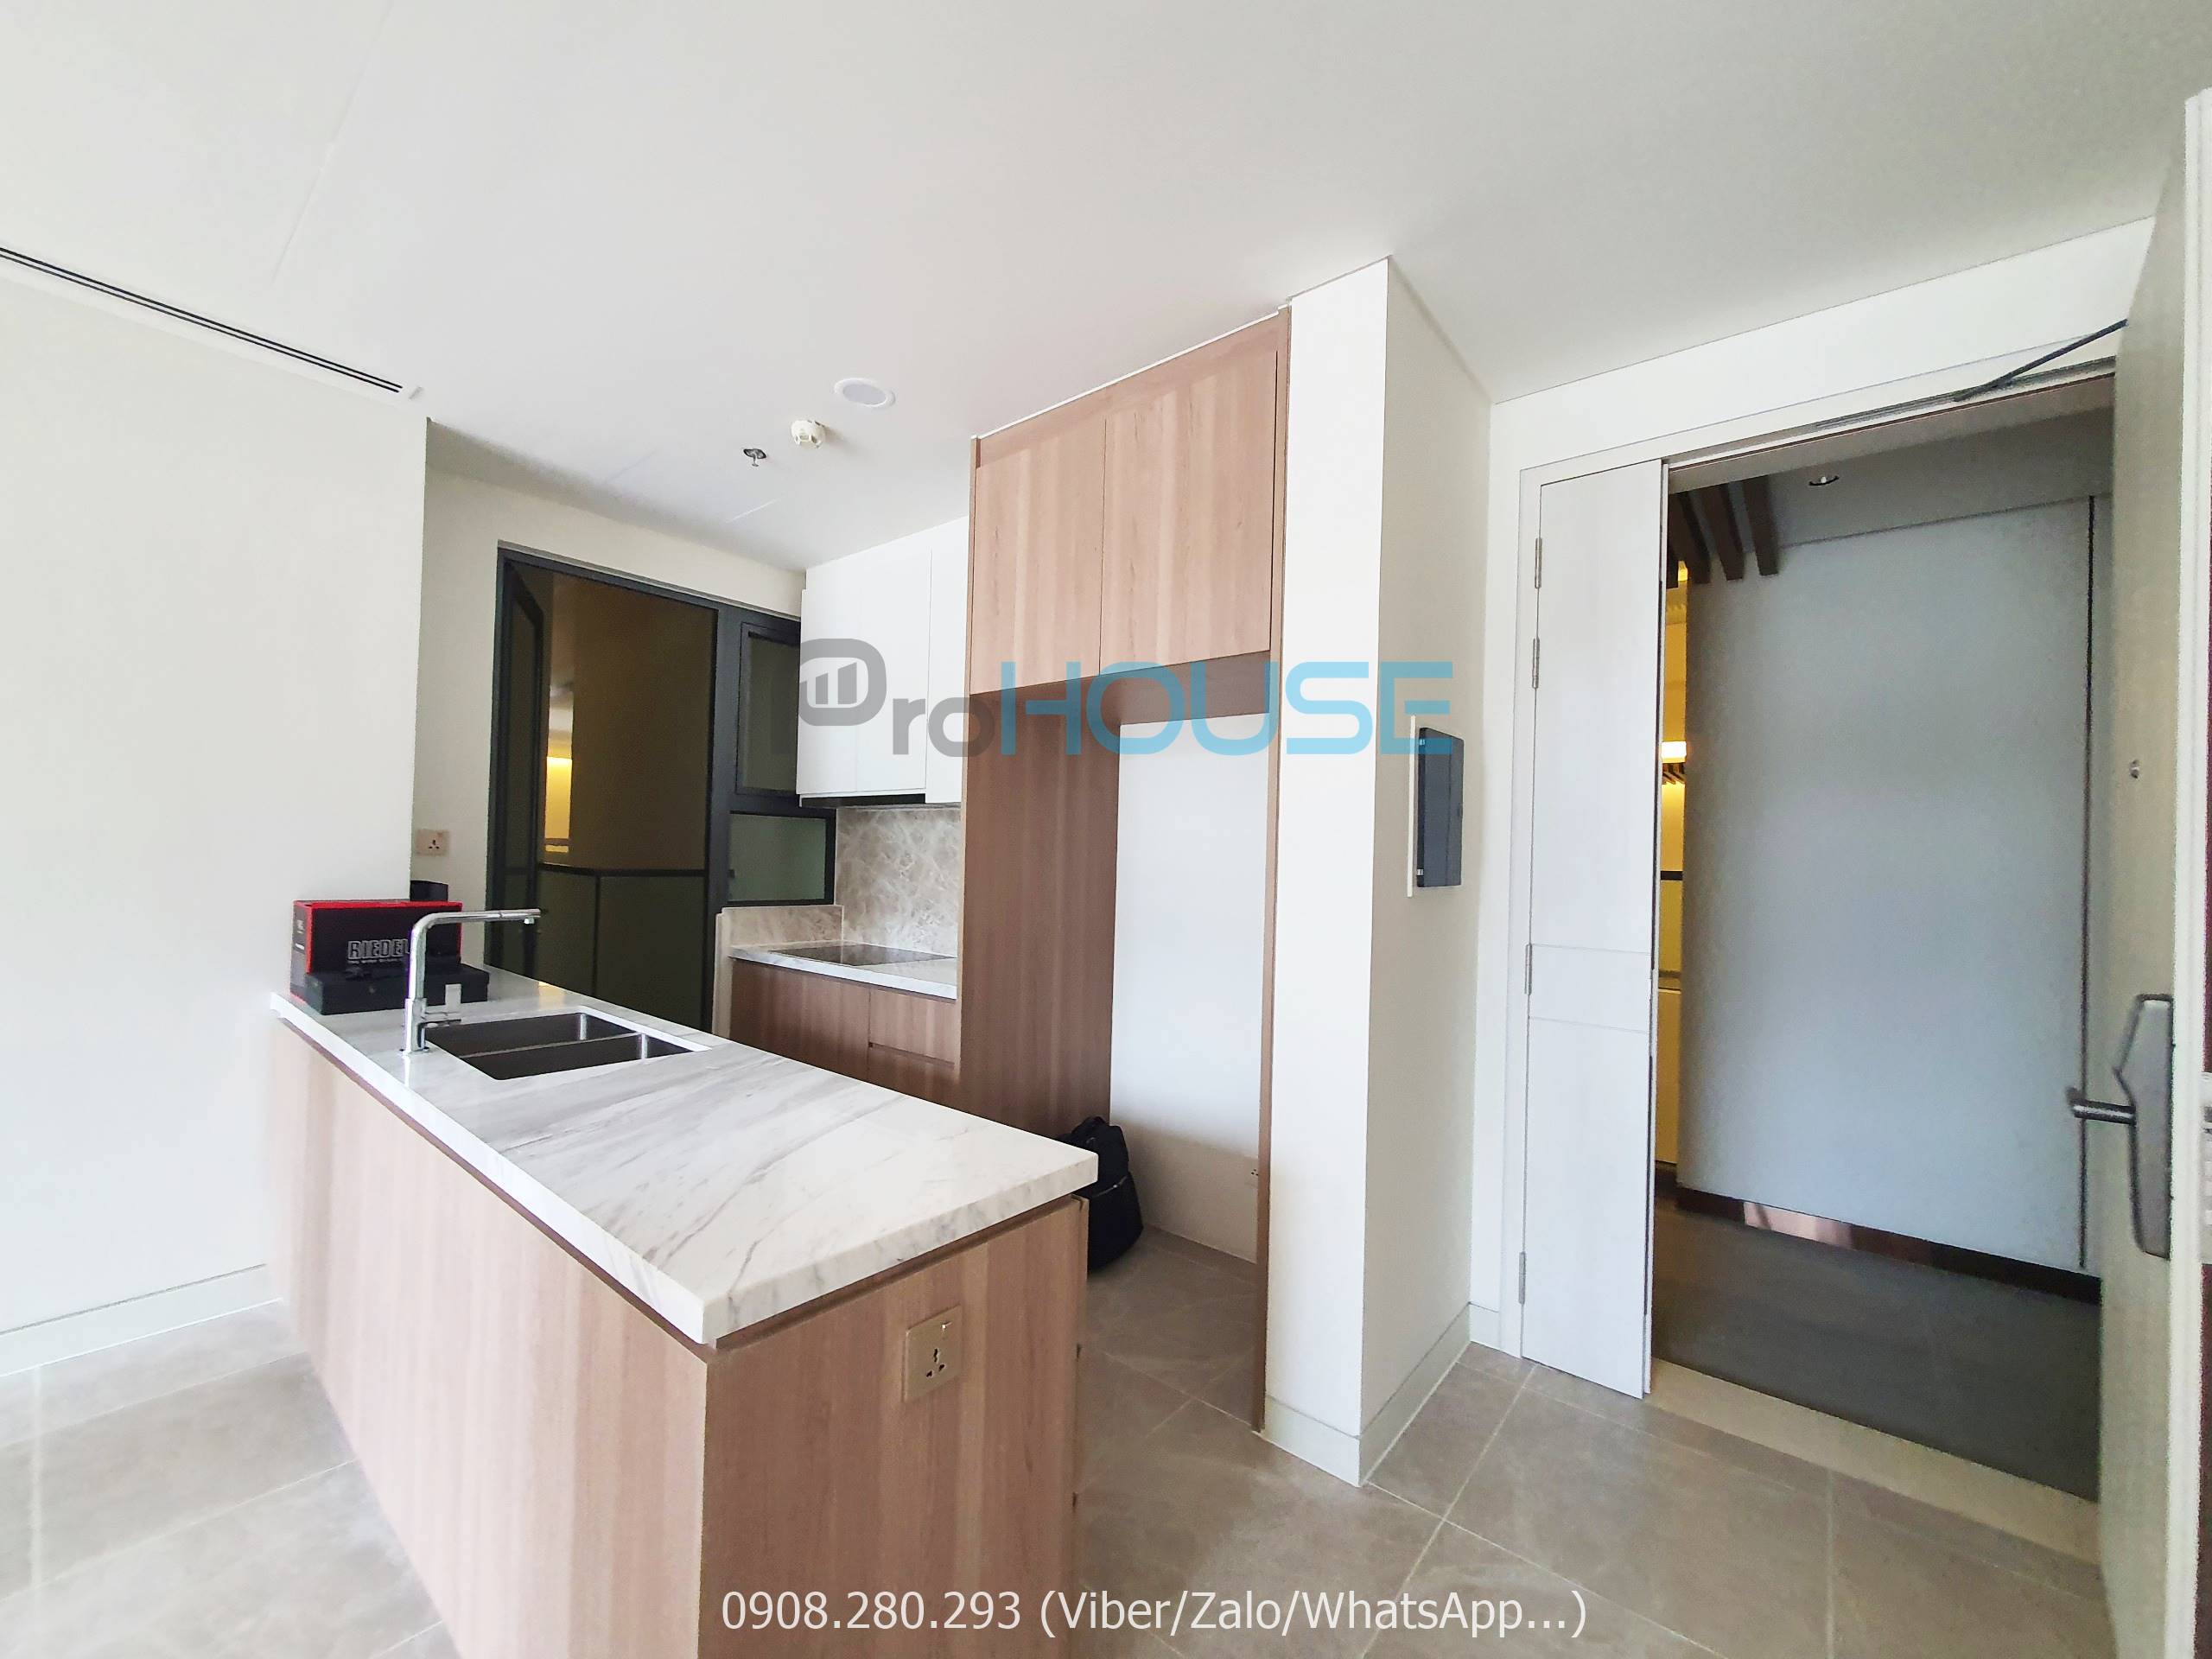 Good price 2 bedroom apartment in Cove Residences for rent